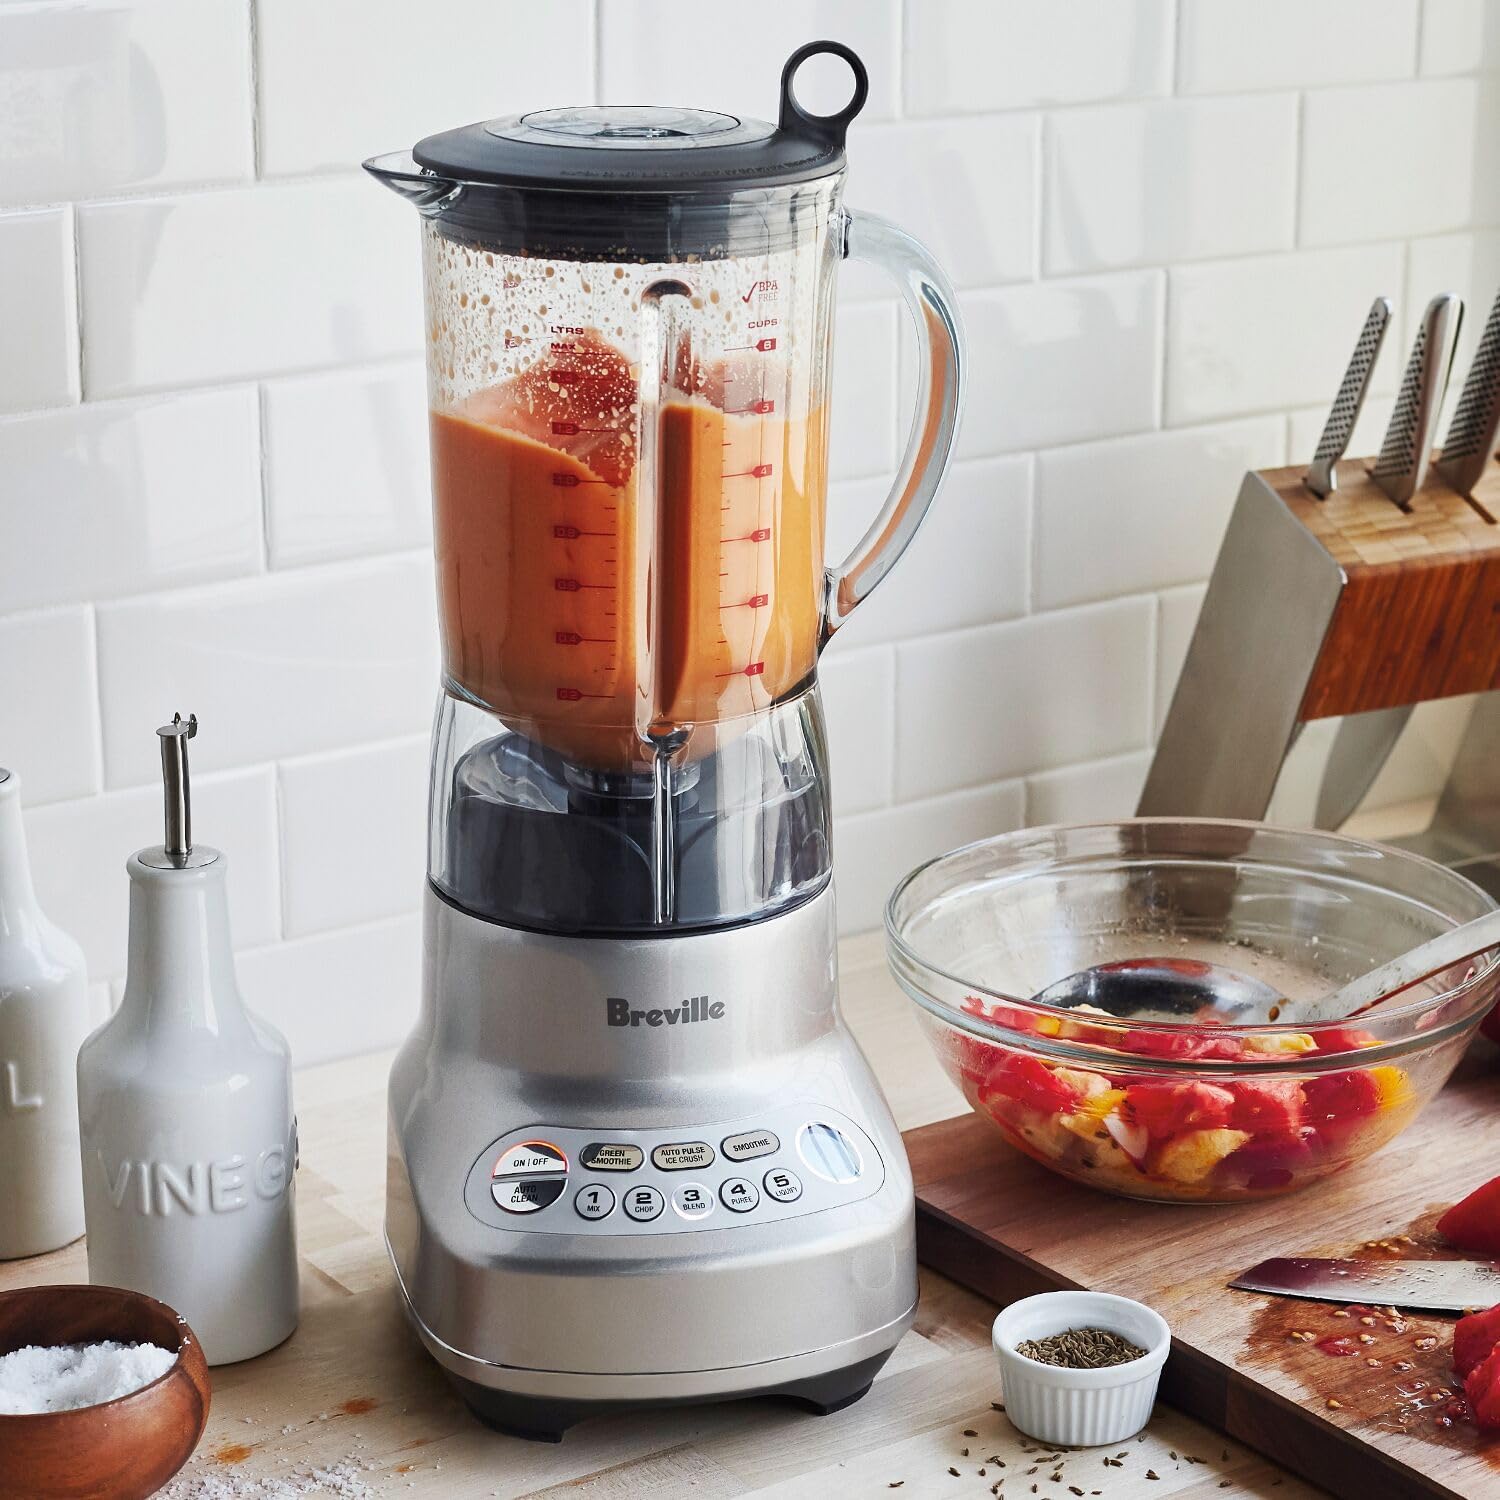 Breville Fresh and Furious Blender Review - Rate My Blender